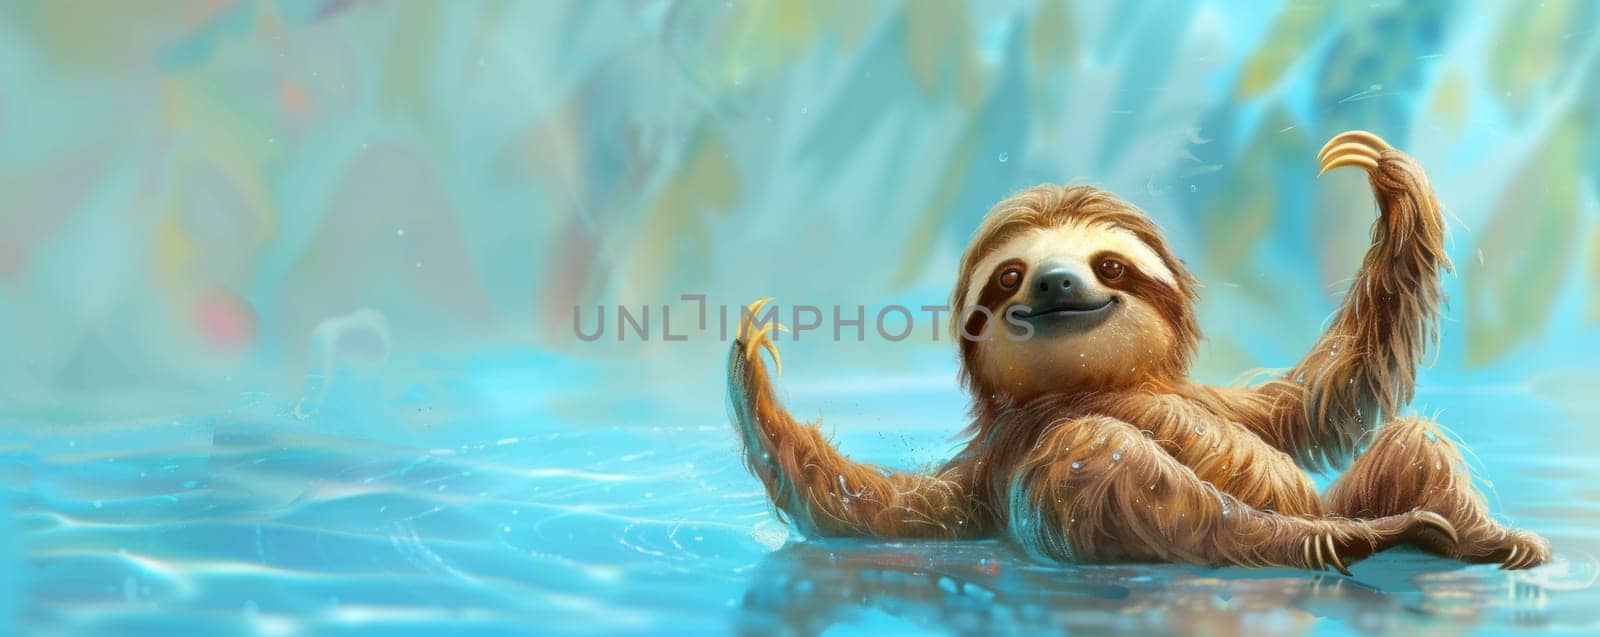 A sloth swimming in a pool by Anastasiia